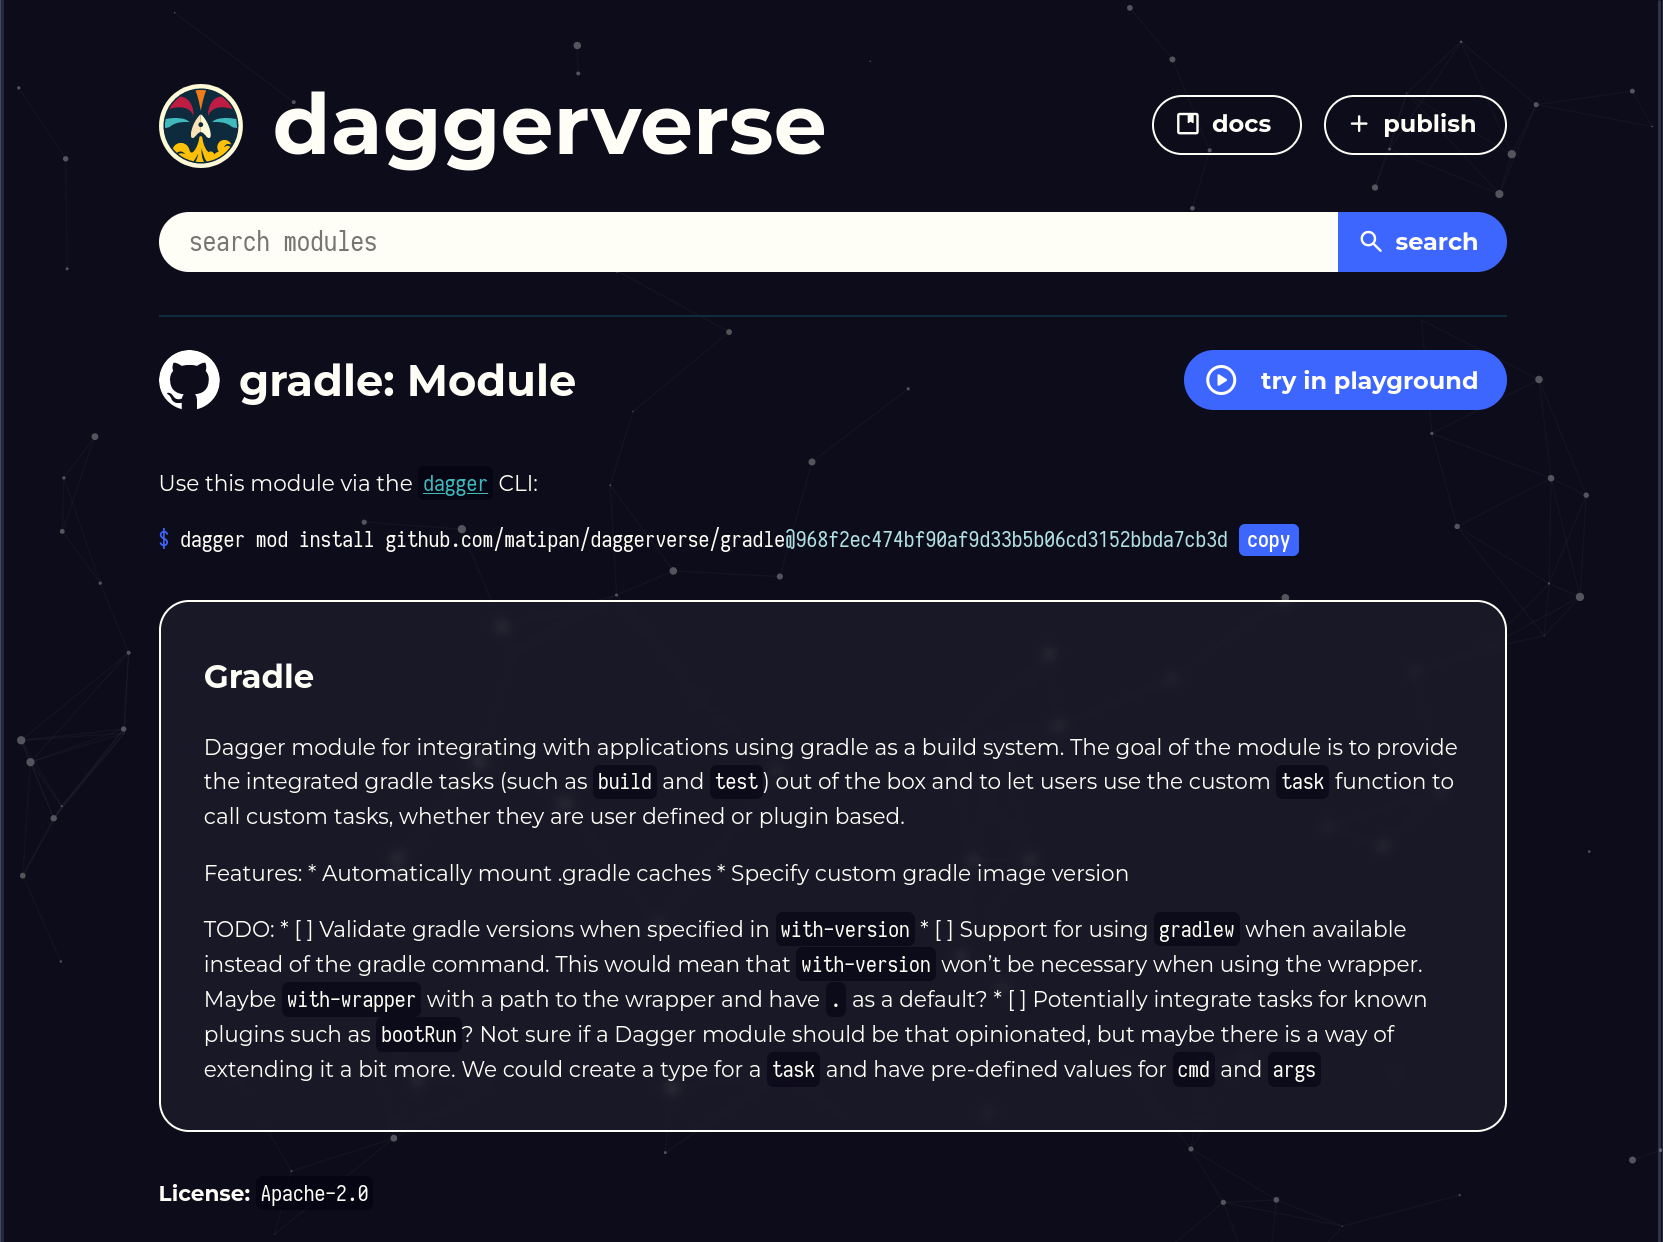 a webpage of the Daggerverse showing the documentation of a module for running gradle tasks